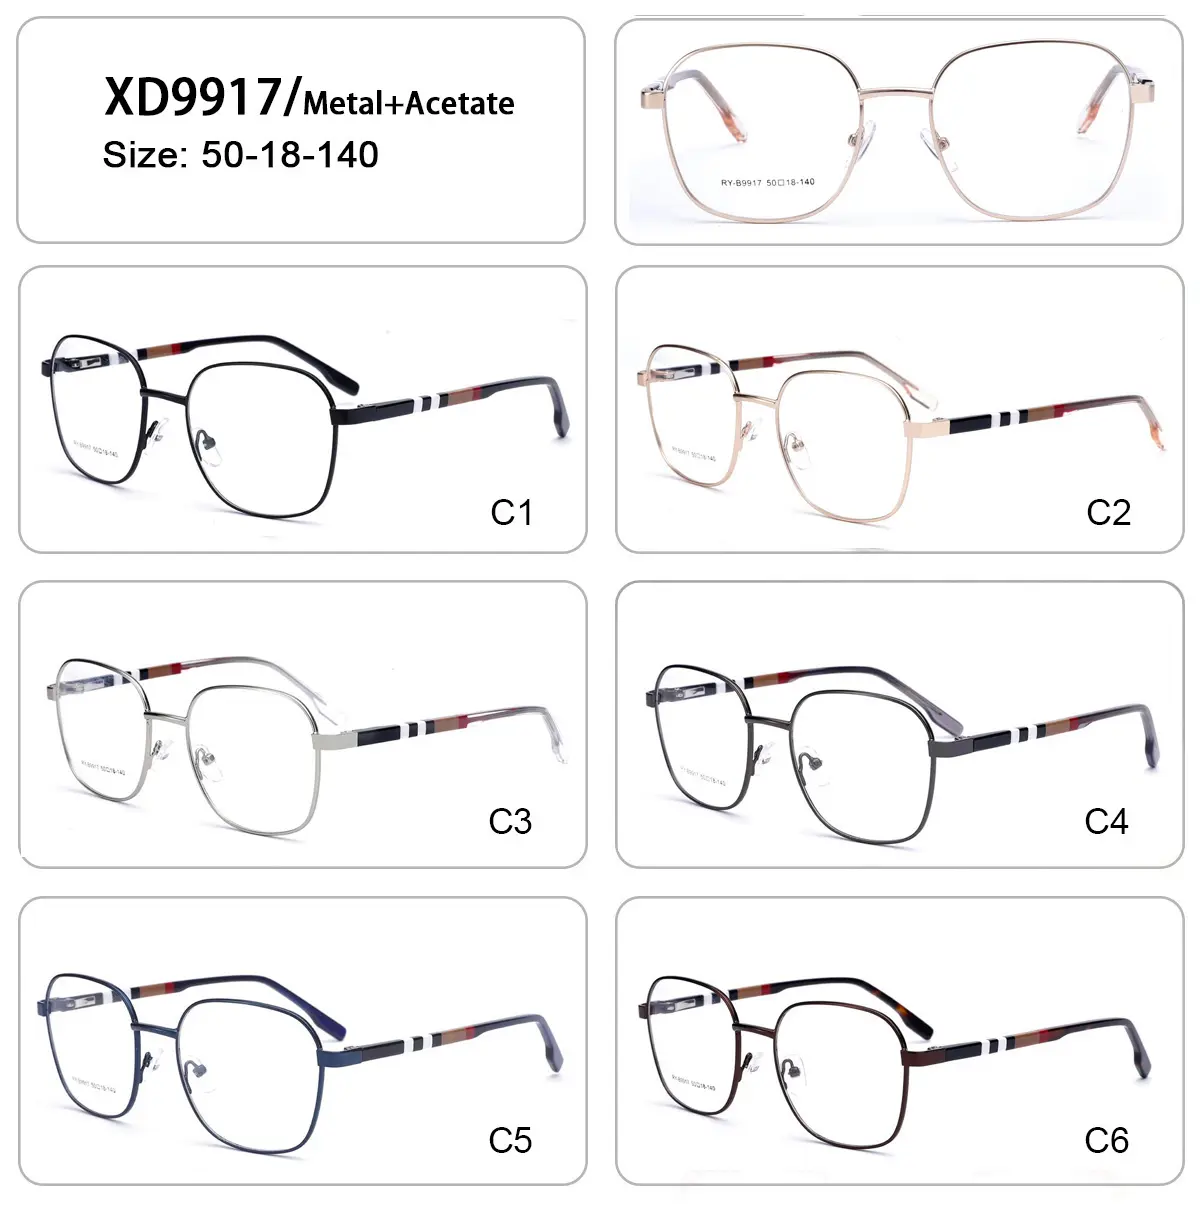 Discover the perfect blend of style and quality in acetate metal optical frames